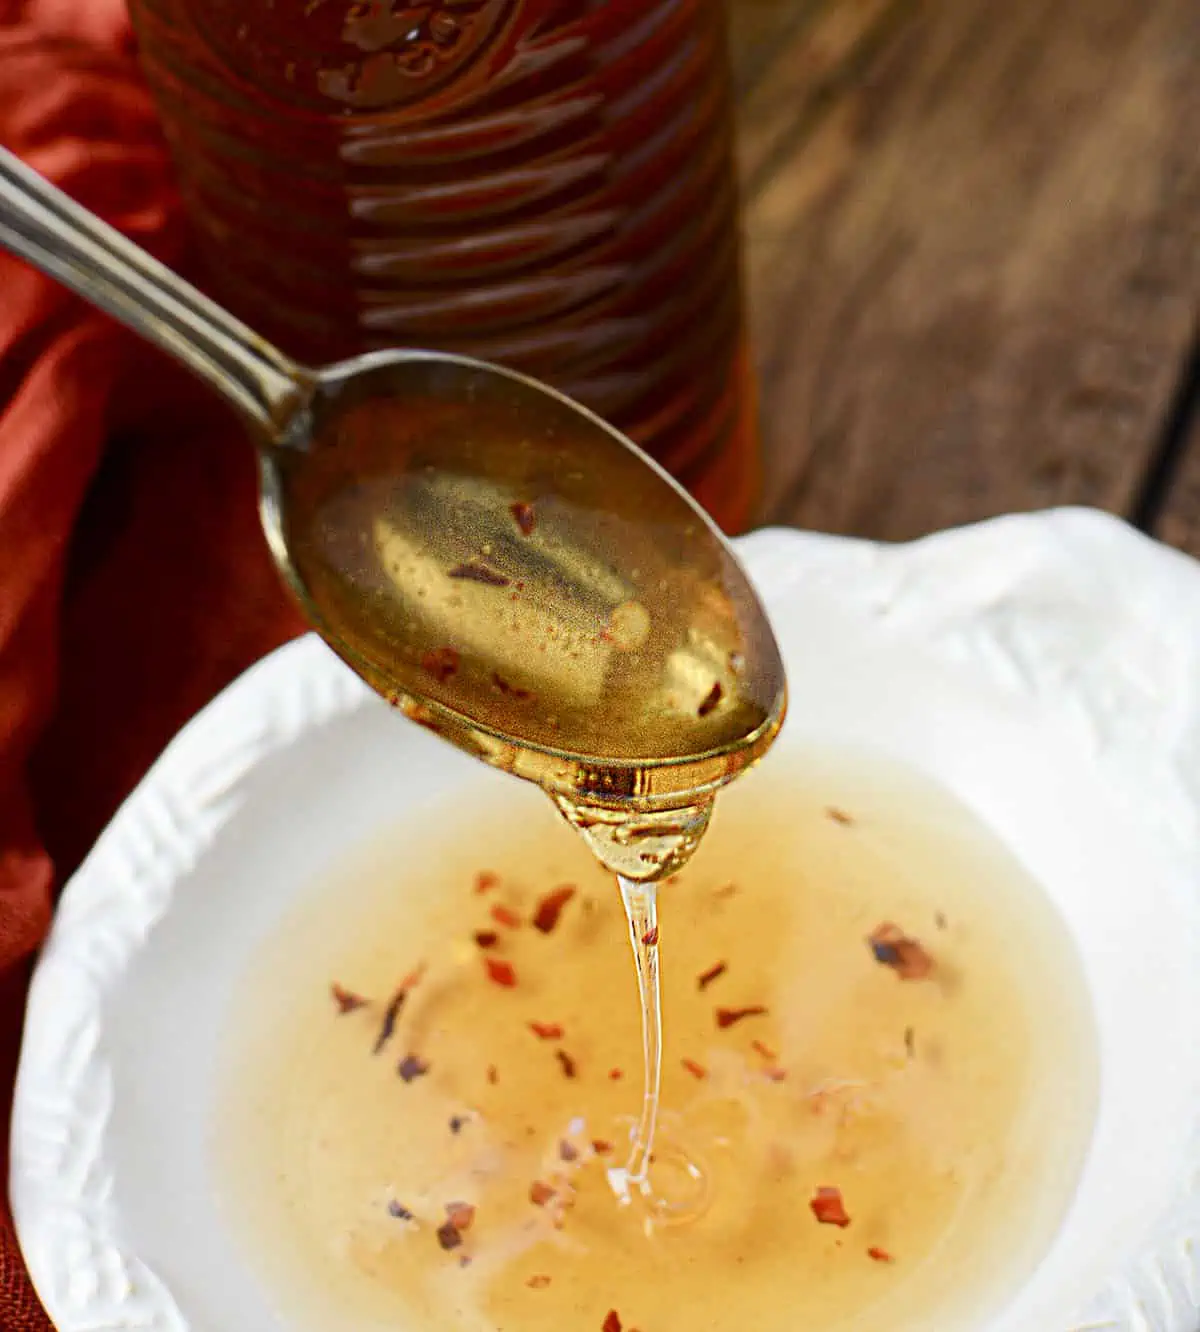 Hot honey is in a white bowl and dripping off a spoon.